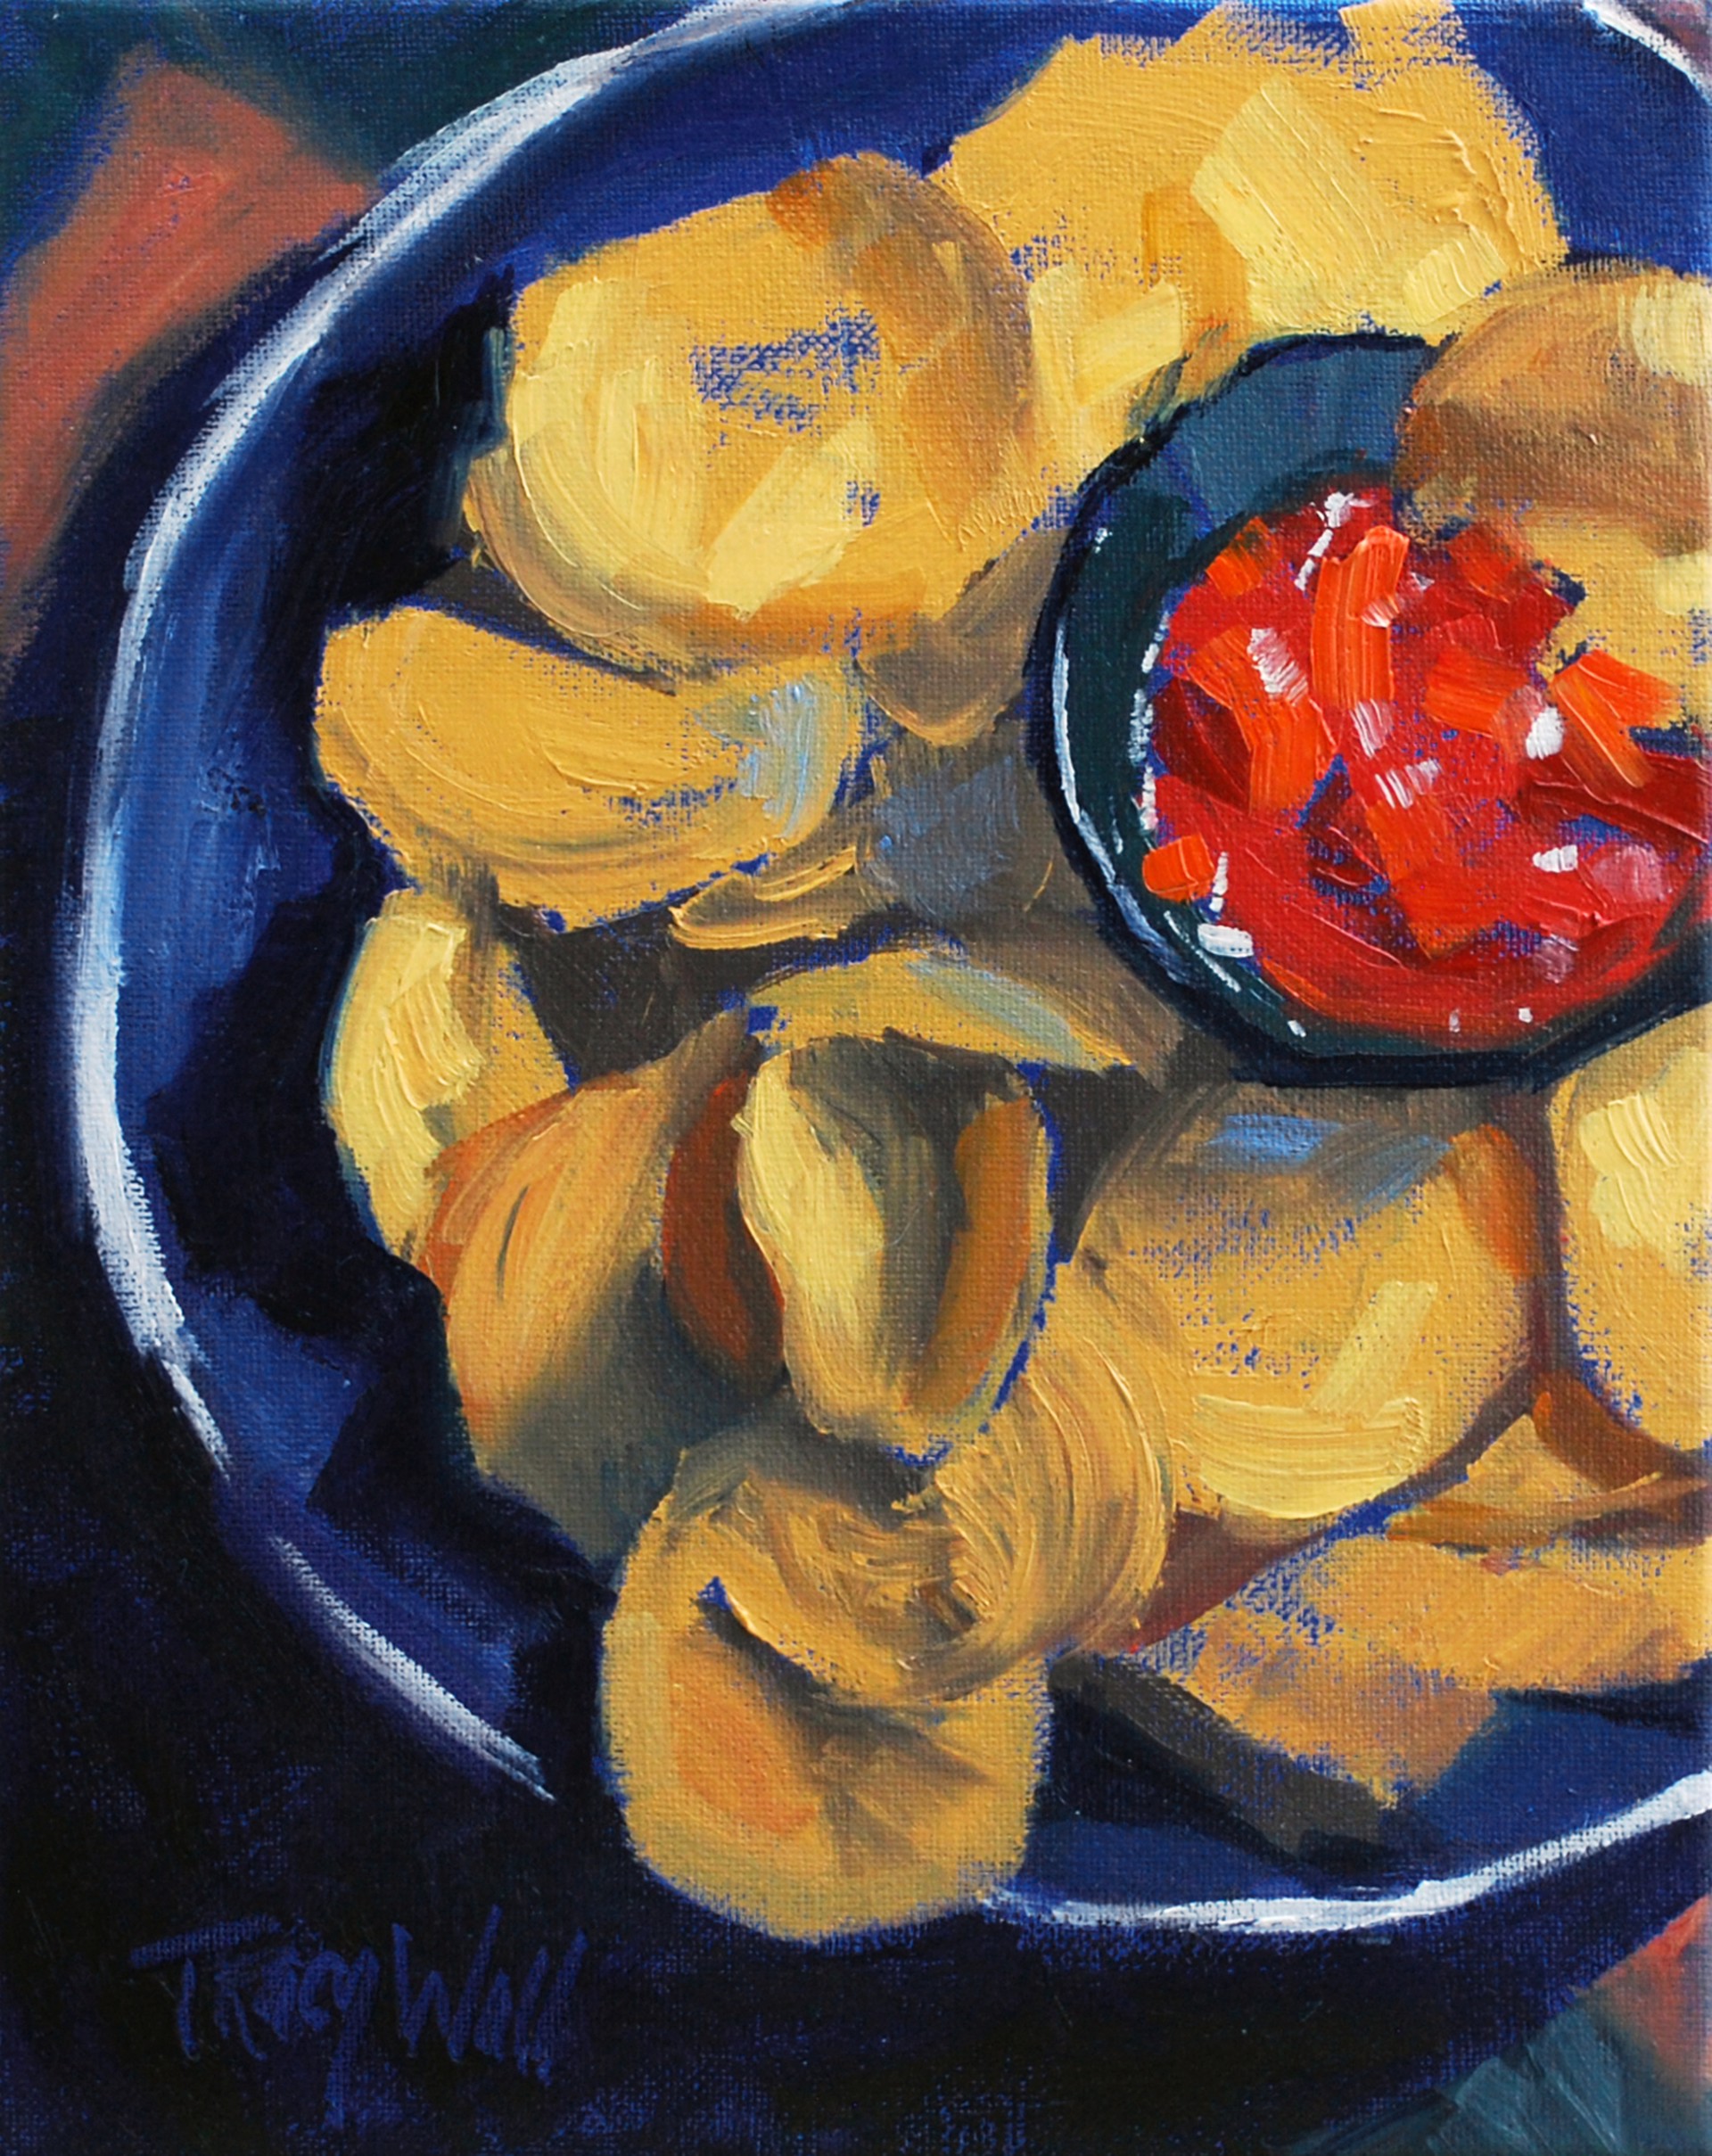 Tracy Wall - Mainstreet Chips and Salsa Oil on canvas10 x 8 in $395.00